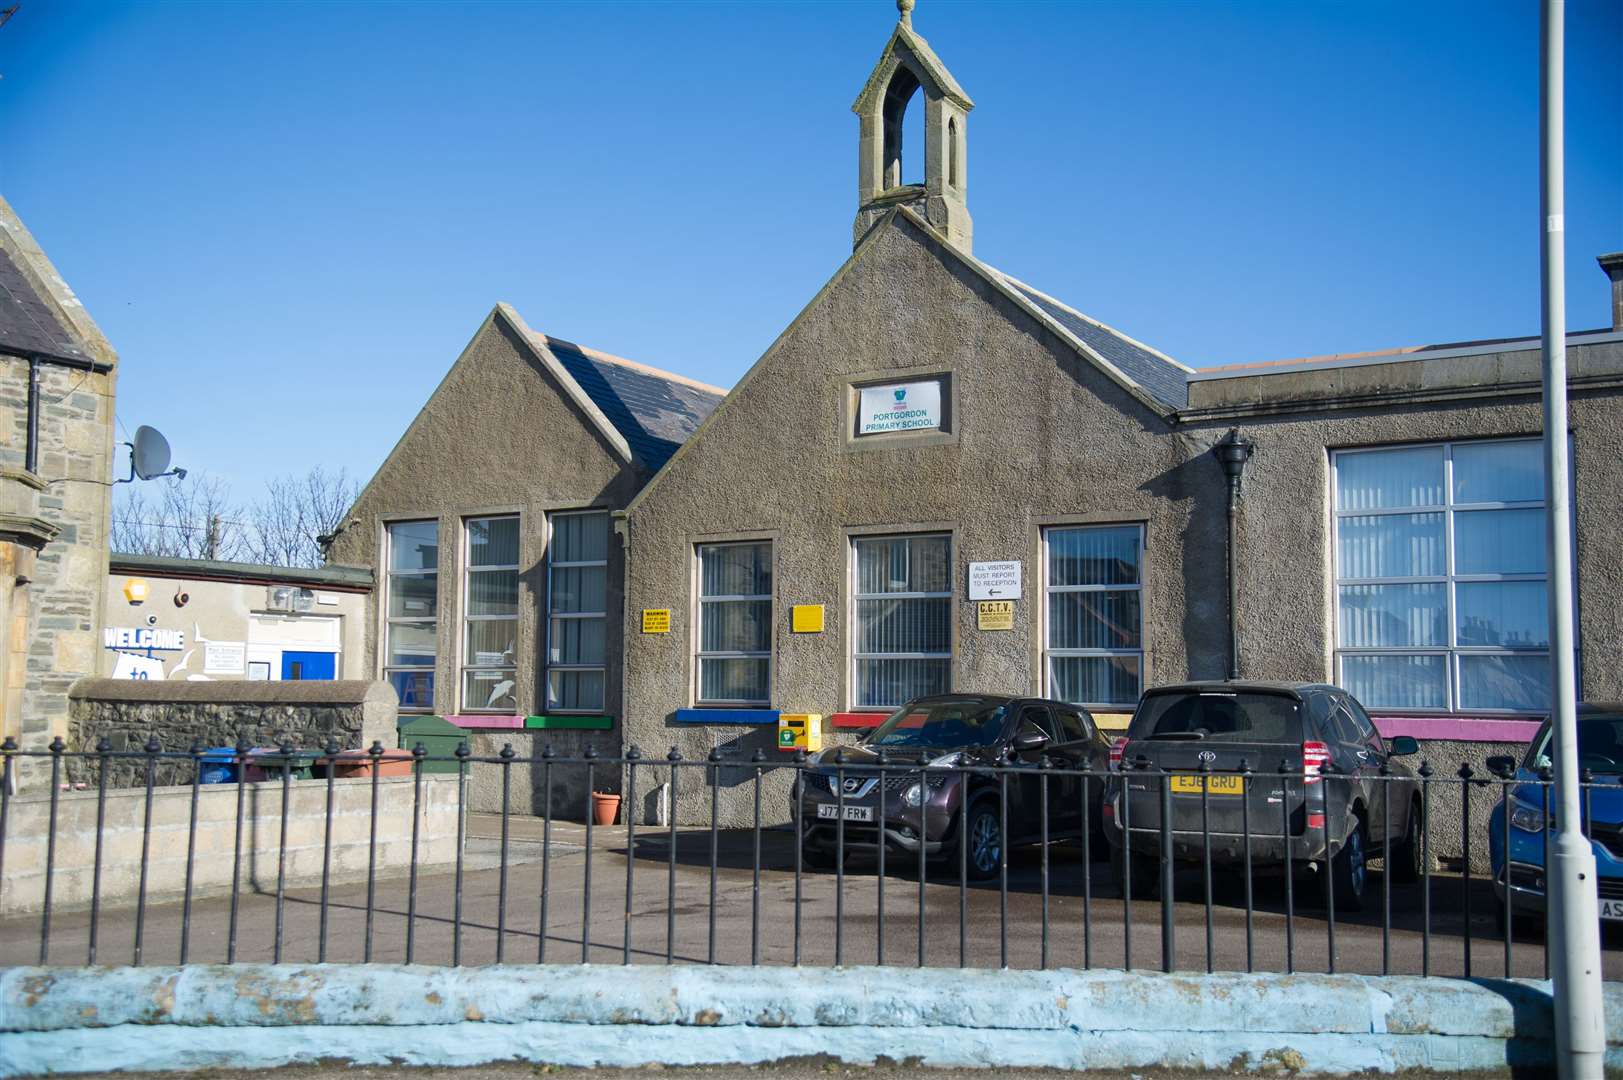 Portgordon Primary School was described as "friendly, warm and welcoming" by inspectors.